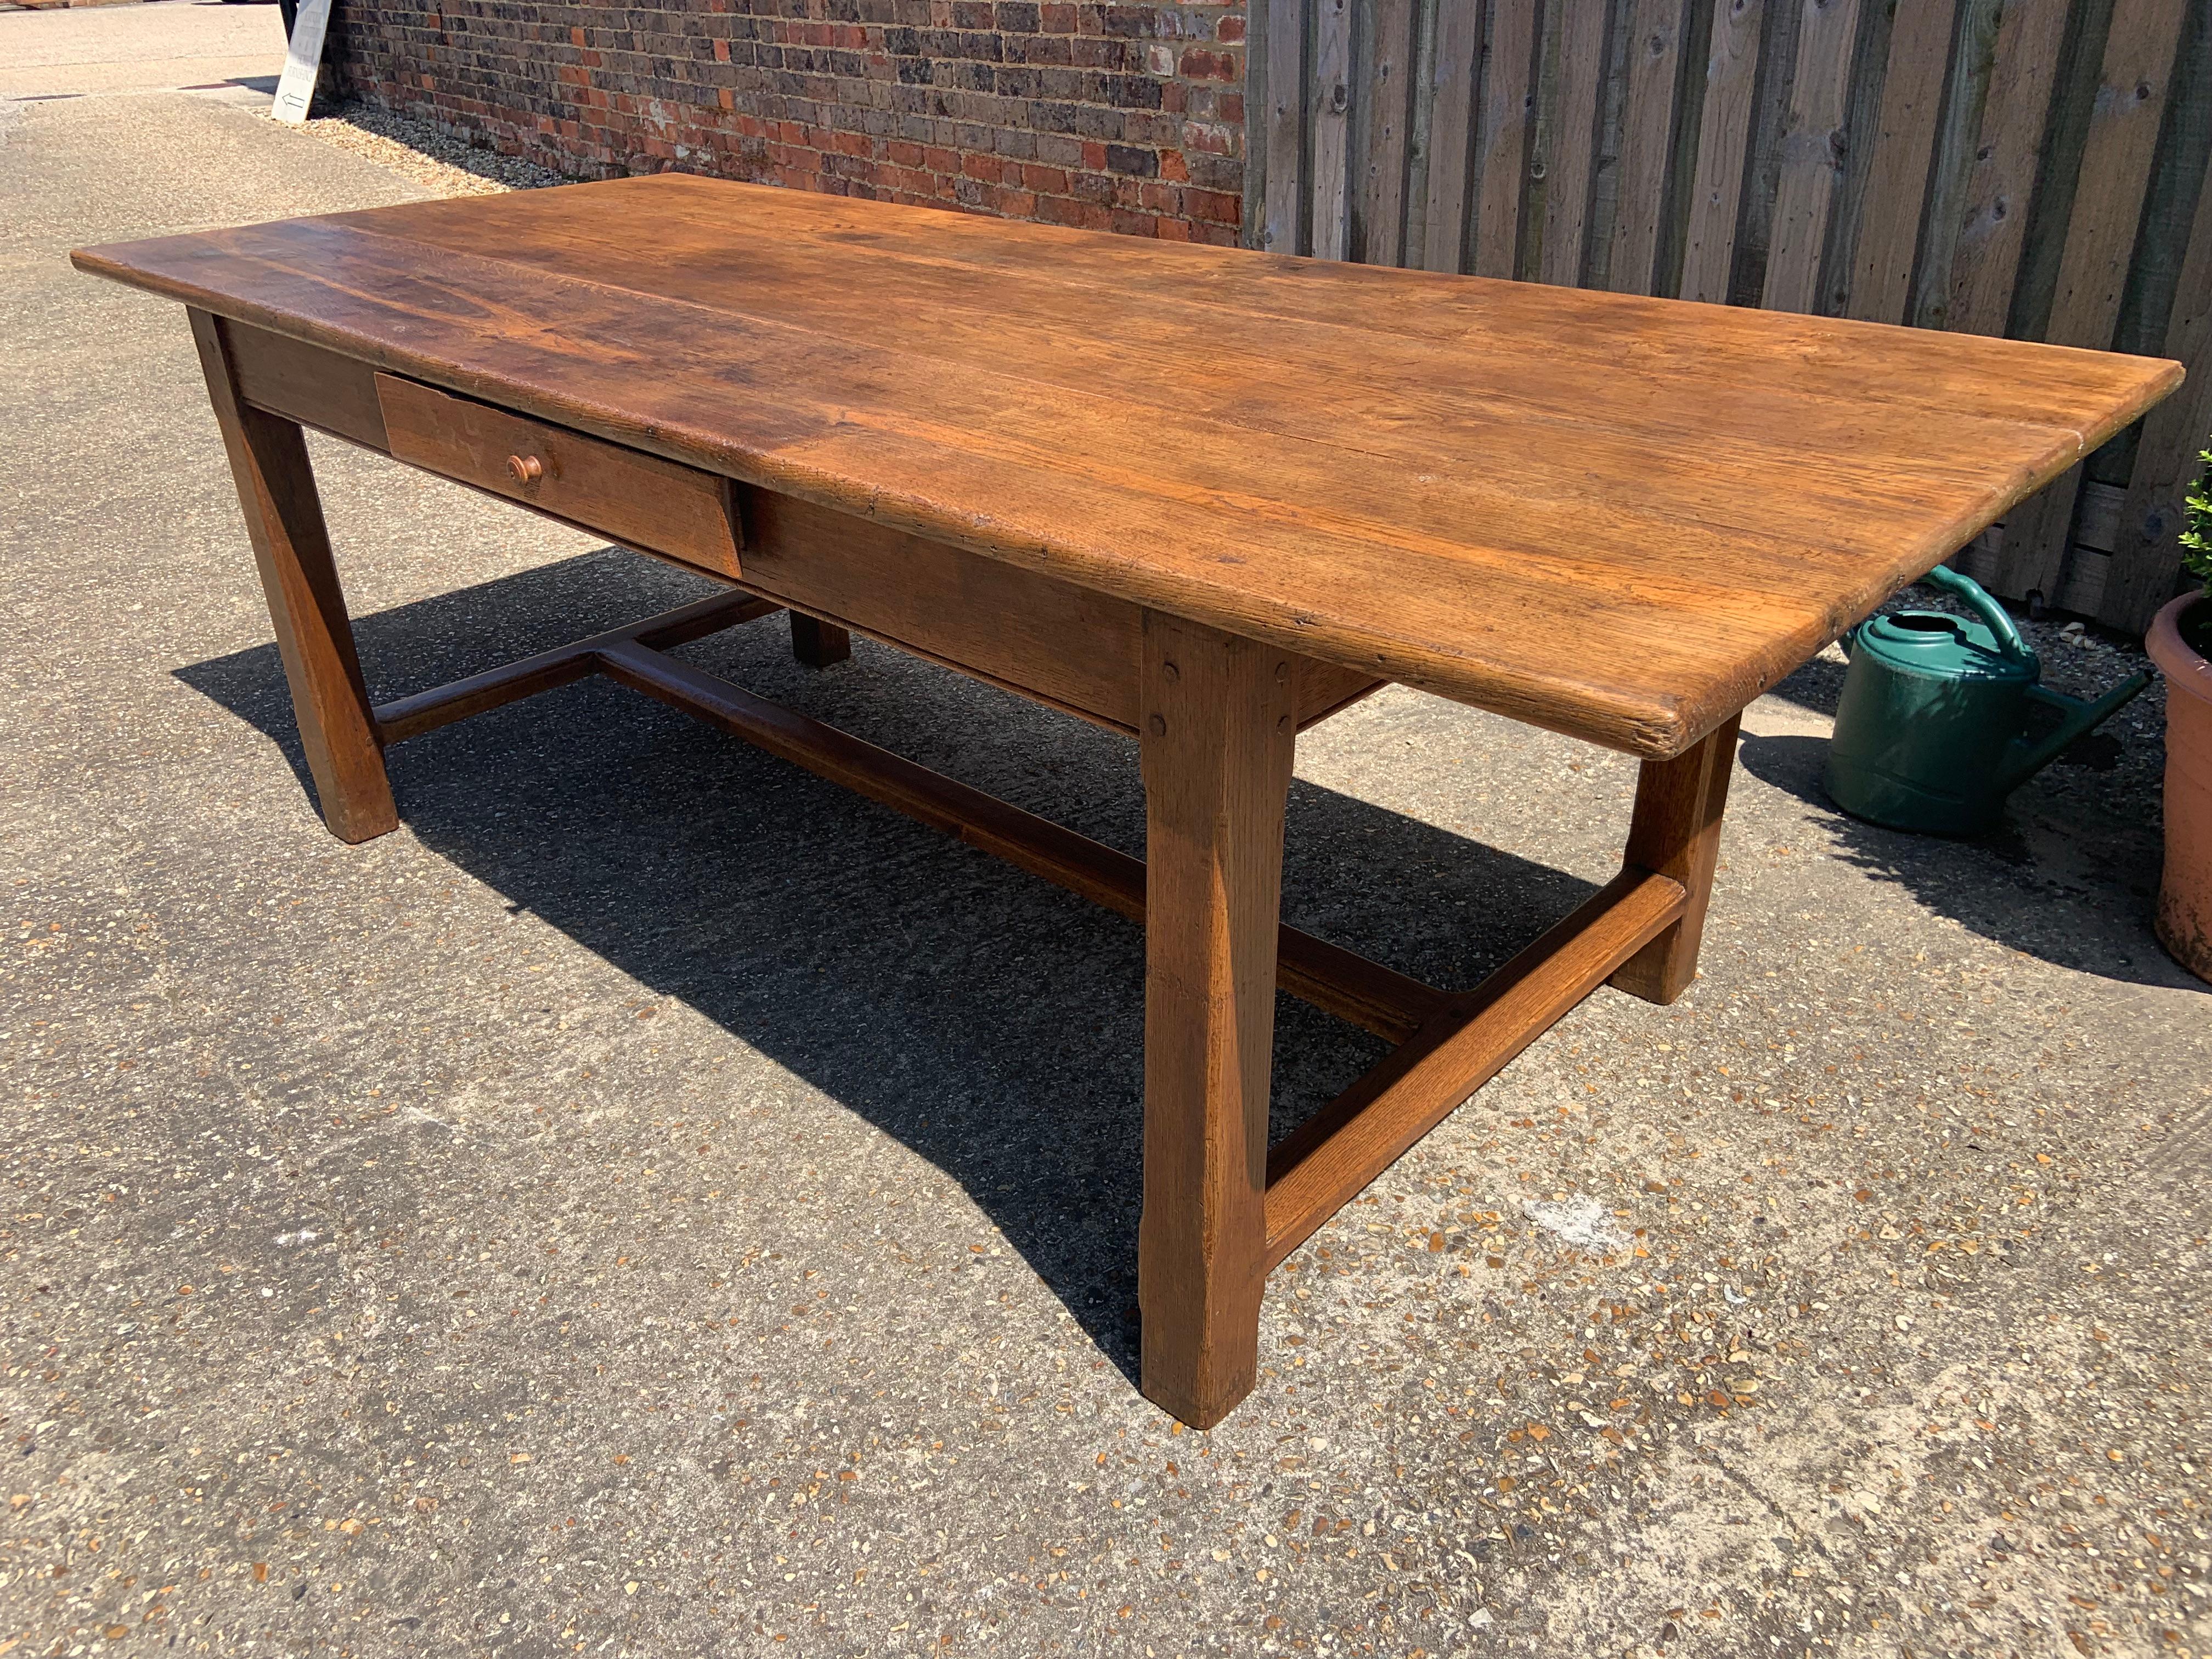 Early 19th century oak farmhouse table with lovely wide three plank top and side drawer. Table sits on a stretcher base.